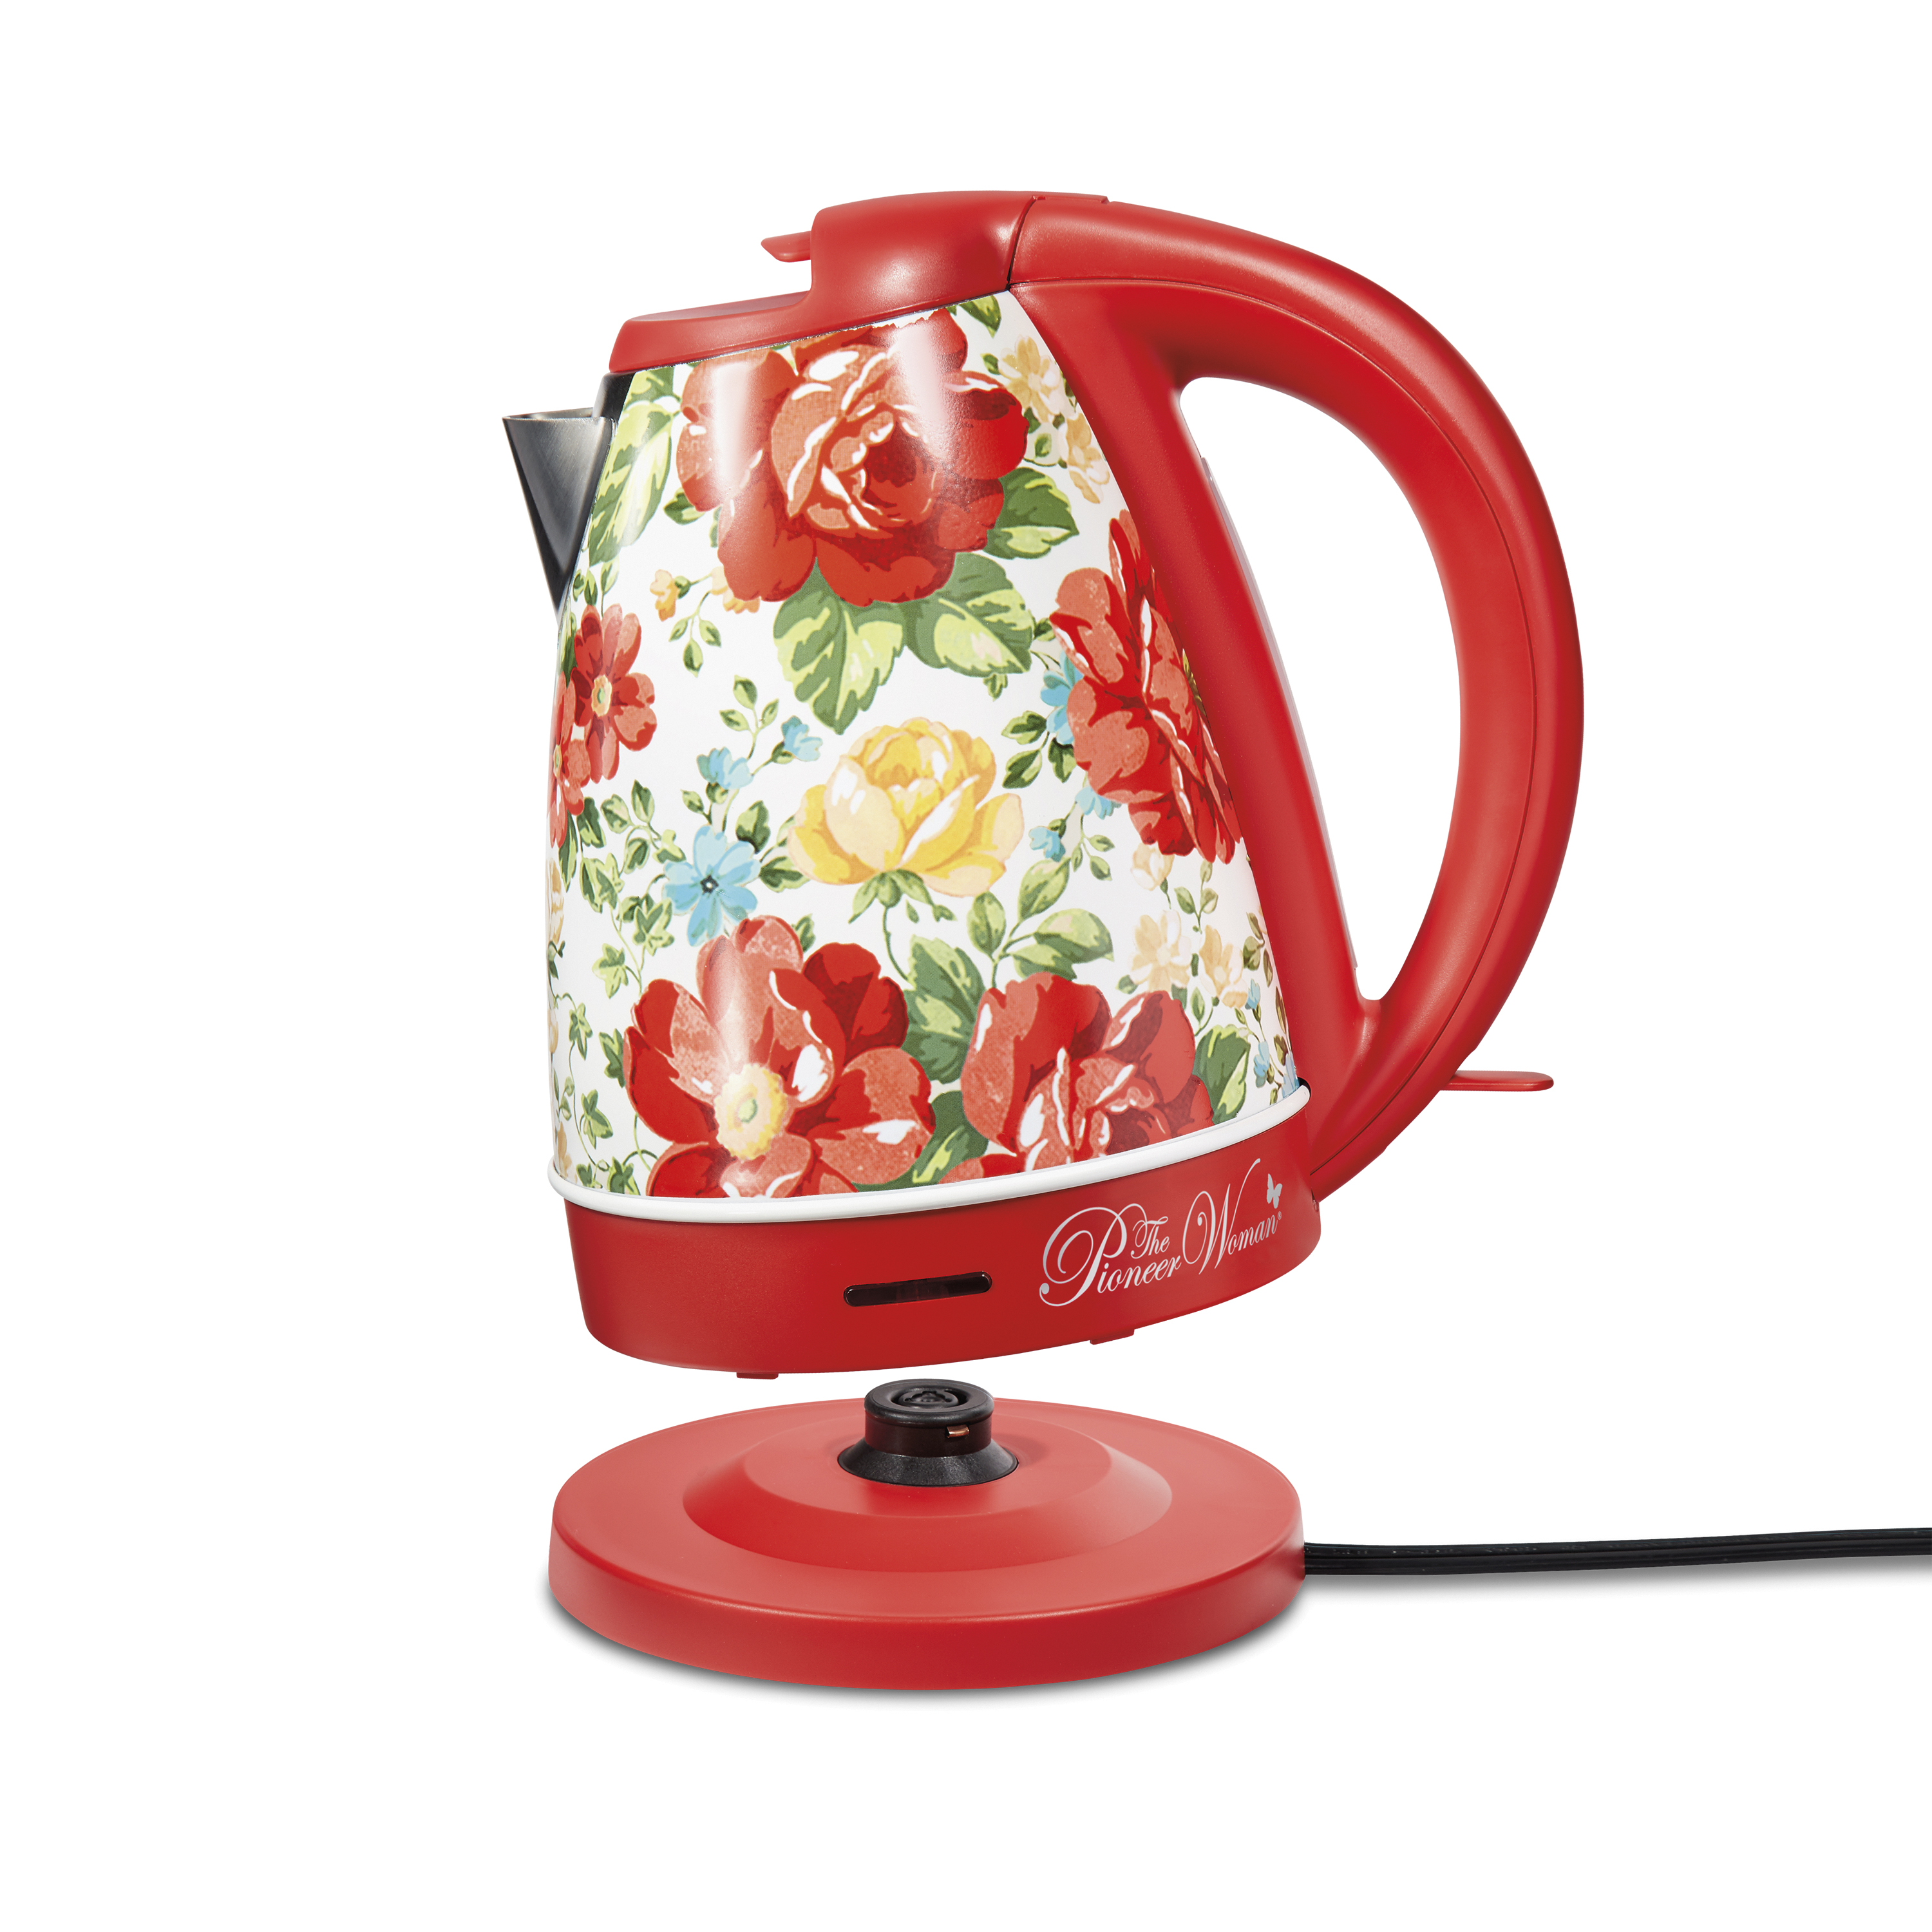 The Pioneer Woman Electric Kettle, Vintage Floral Red, 1.7-Liter, Model 40972 - image 2 of 10